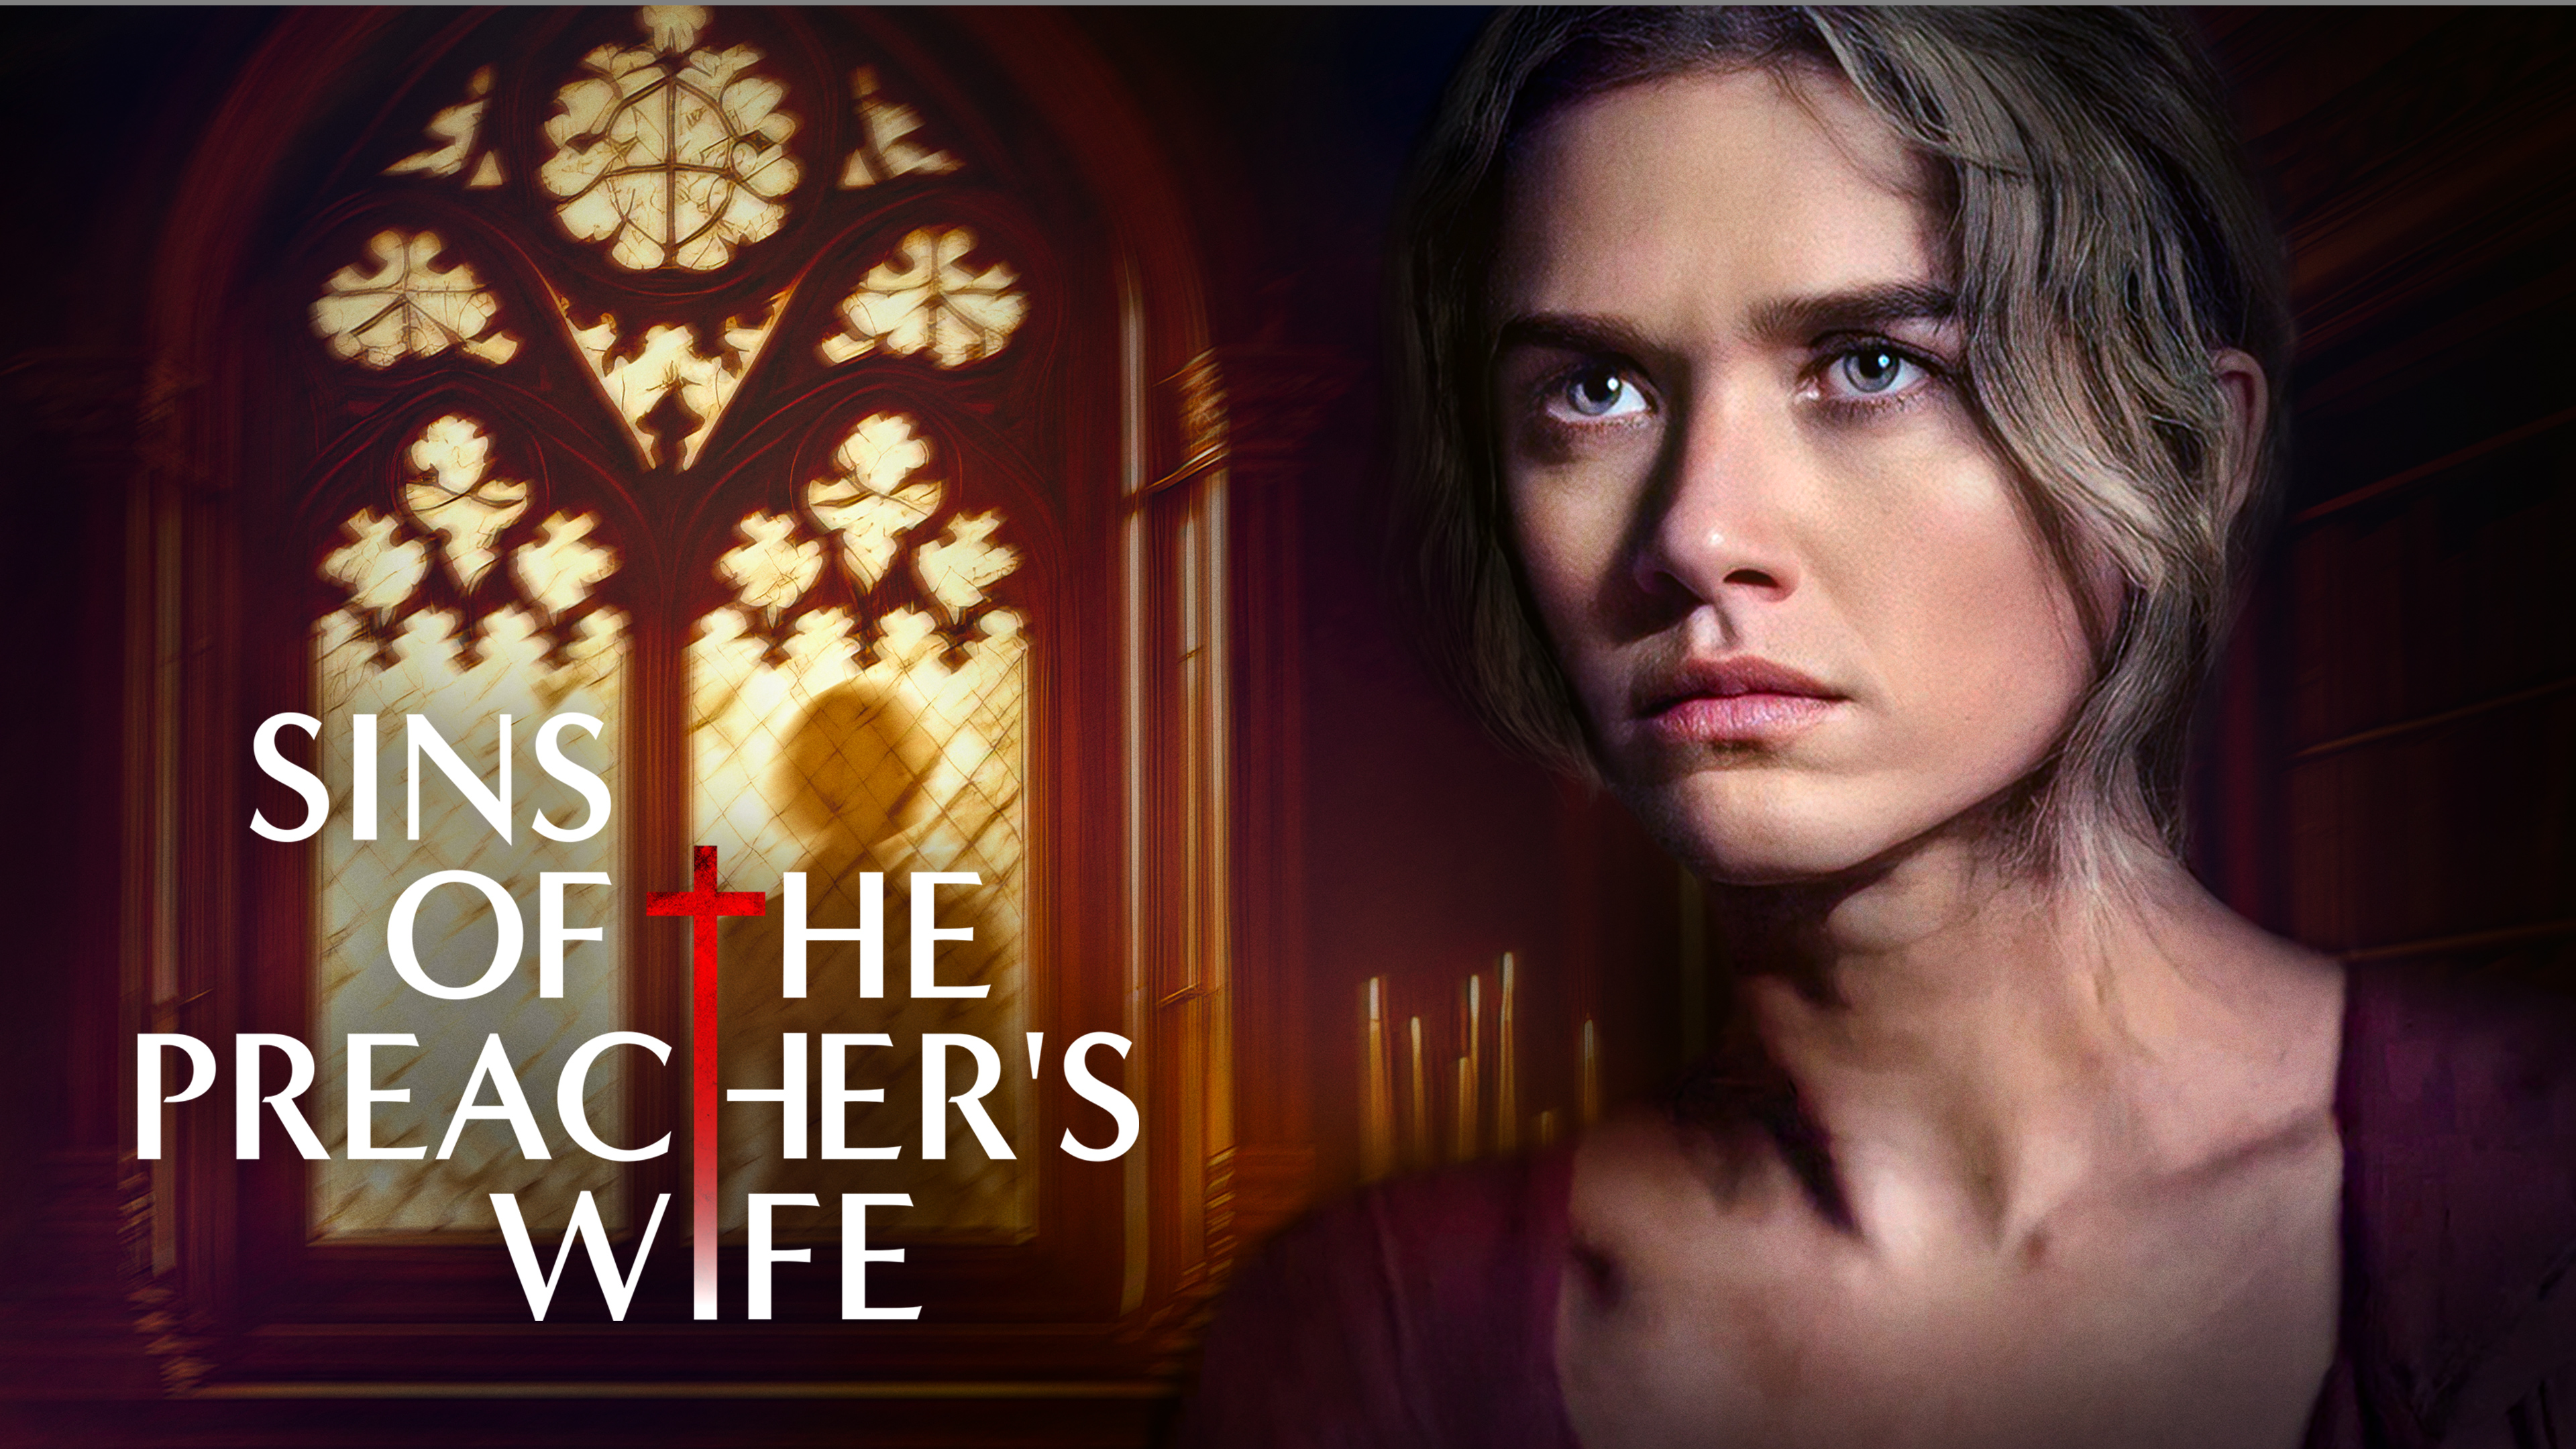 Sins of the Preachers Wife image